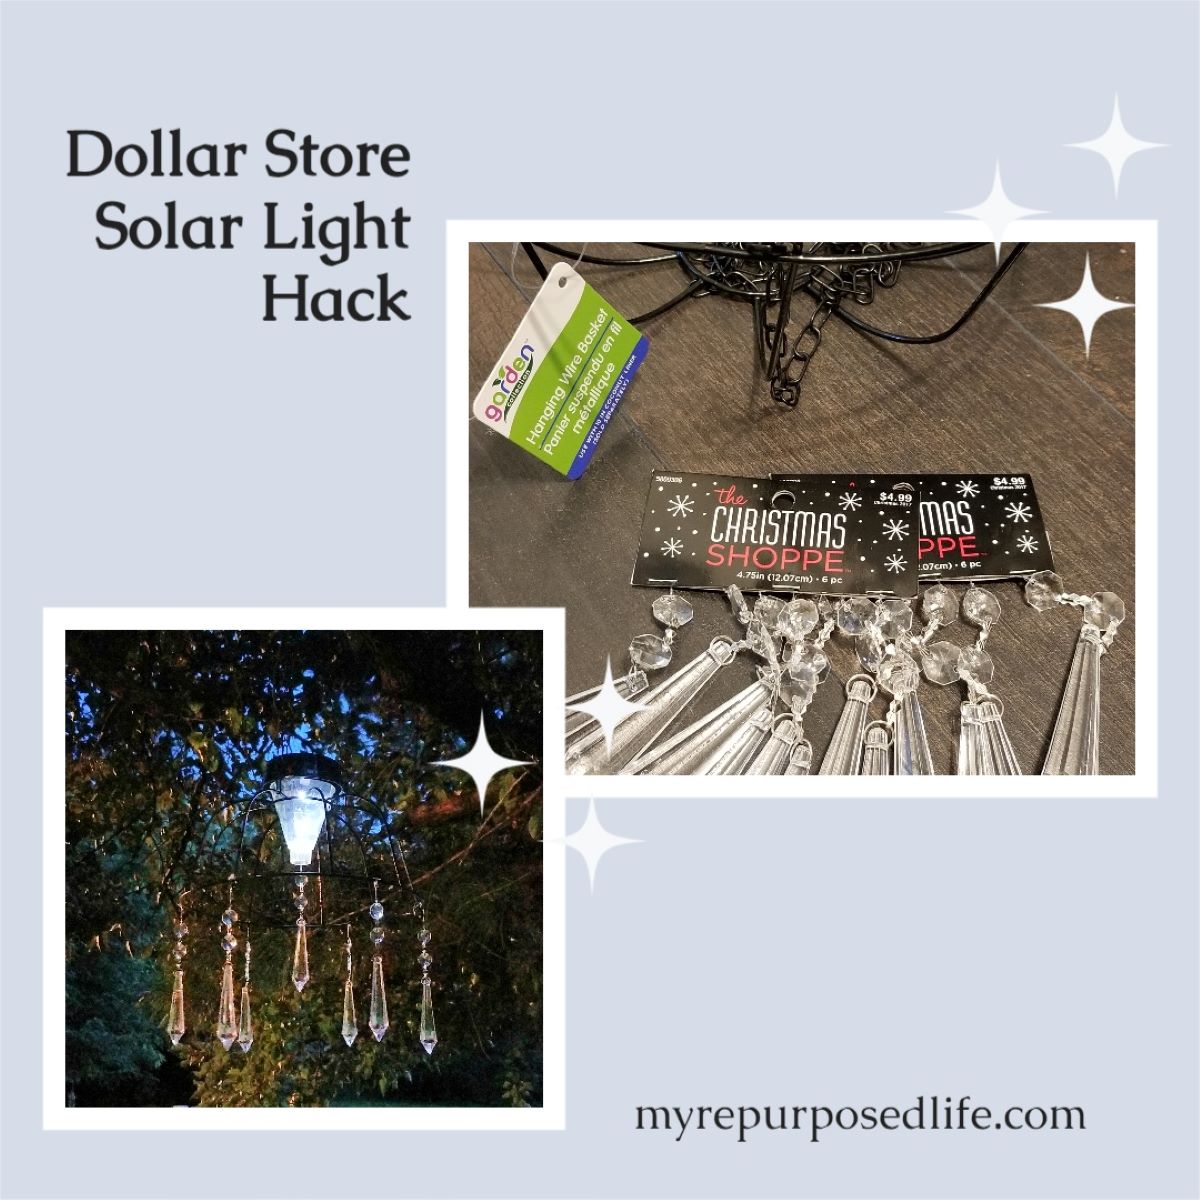 Hanging solar lights using glass chandelier bowls and dollar store items!